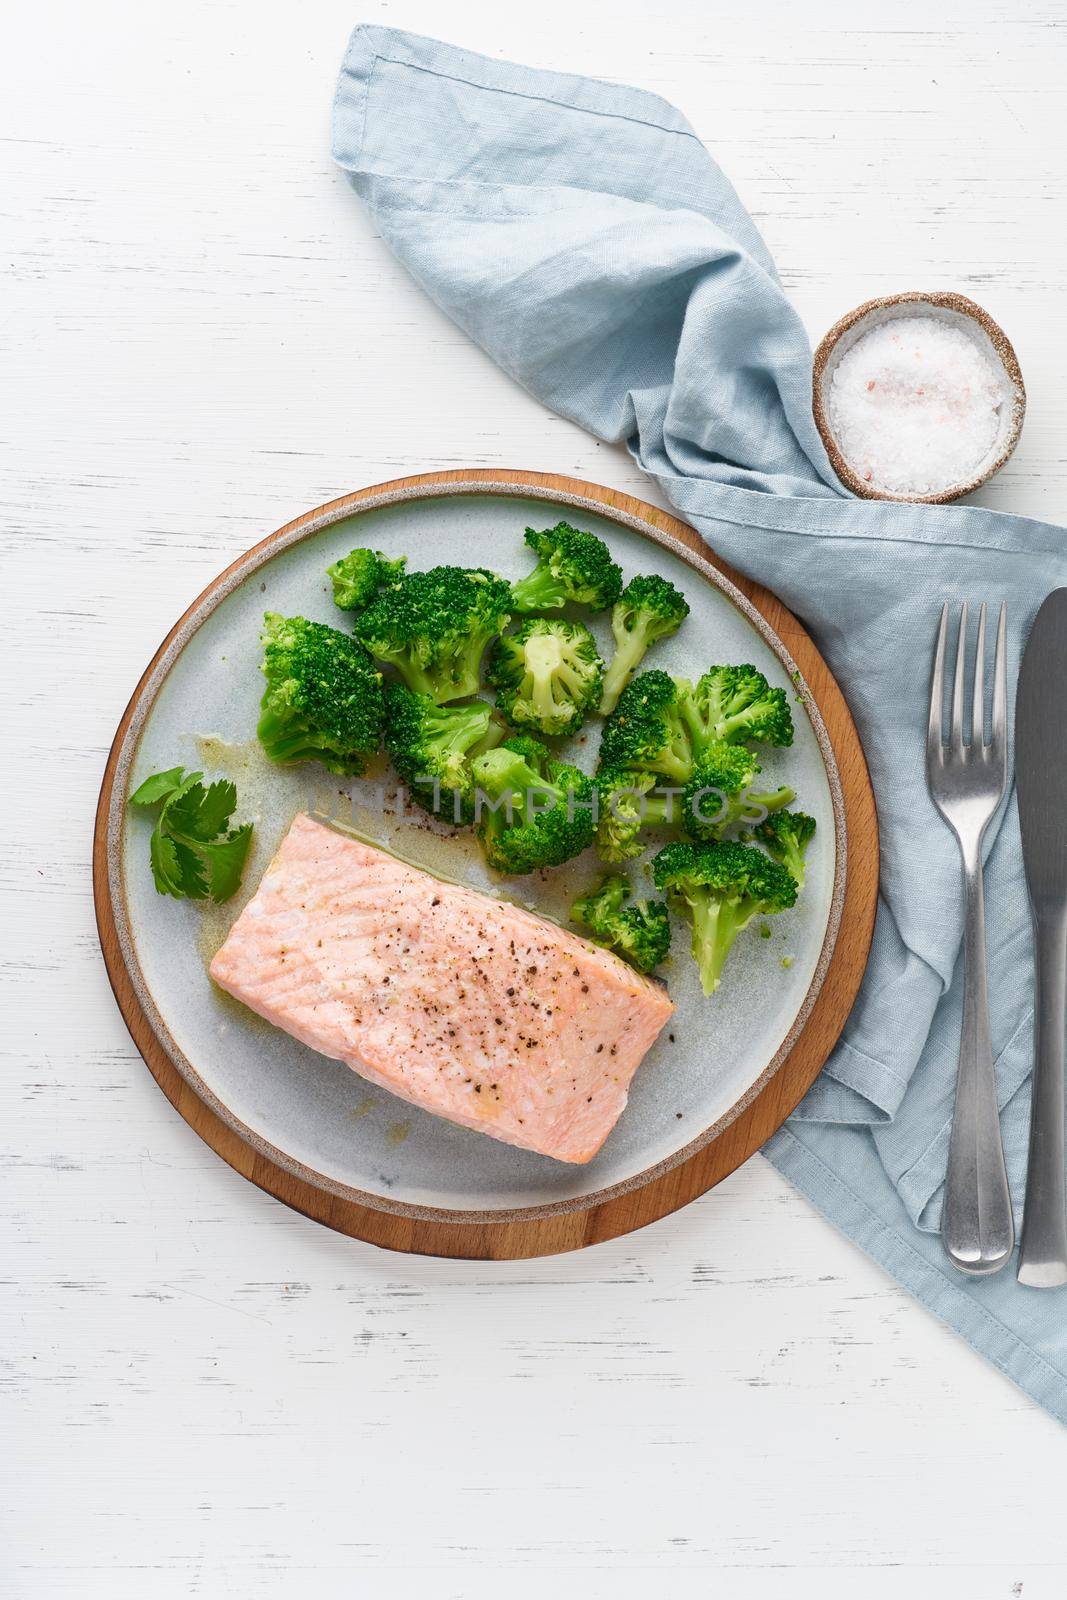 Steam salmon and vegetables, broccoli, paleo, keto, lshf or dash diet. Mediterranean, Clean eating, balanced food. Gray ceramic plate on white table, vertical